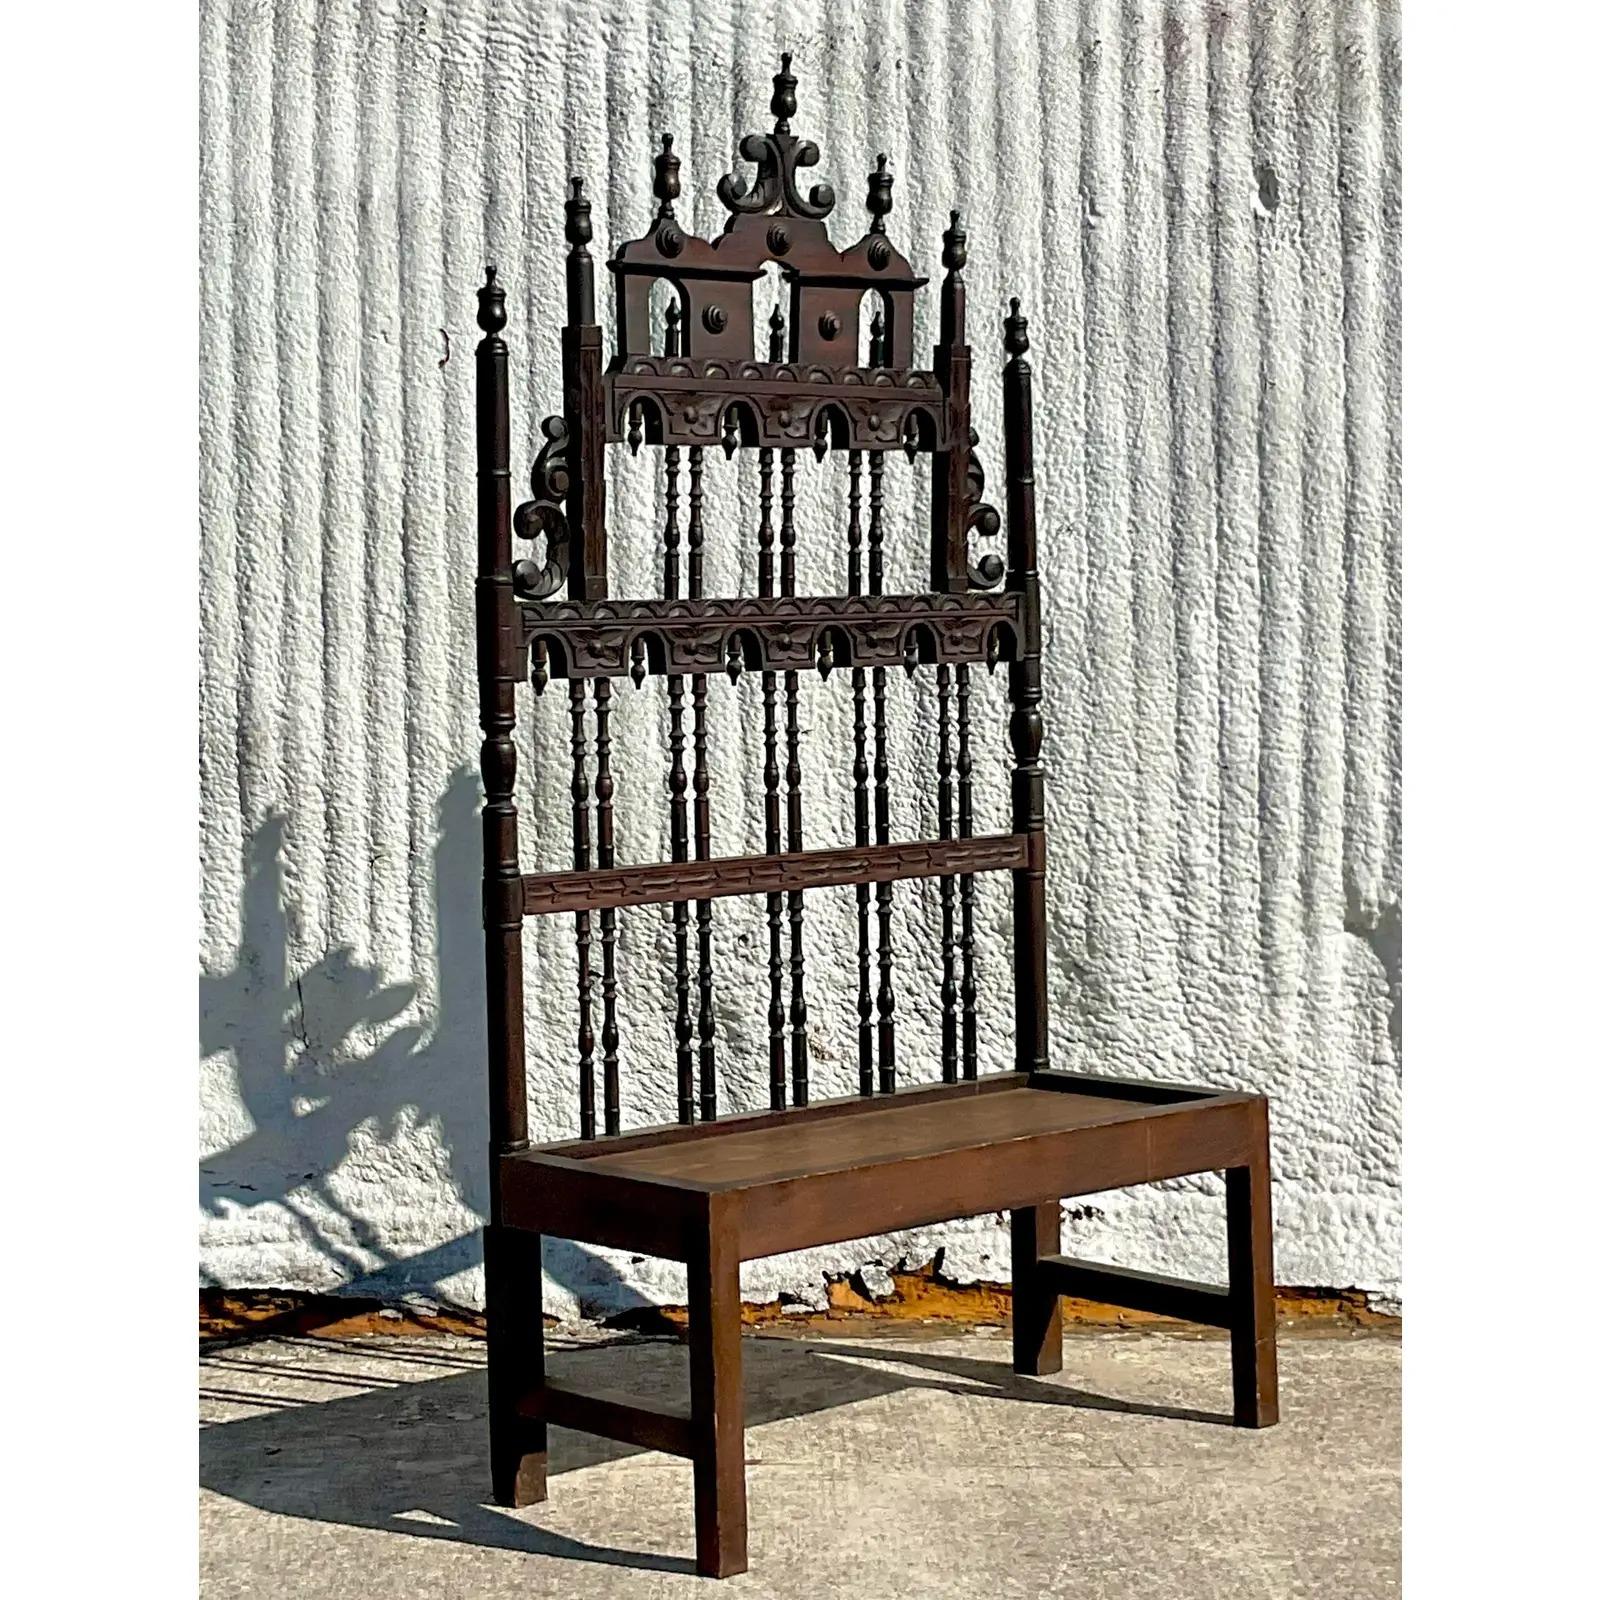 A fabulous vintage Gothic hand carved bench. A chic high back and wide seat. Perfect to add a little drama to any space. Acquired from a Palm Beach estate.